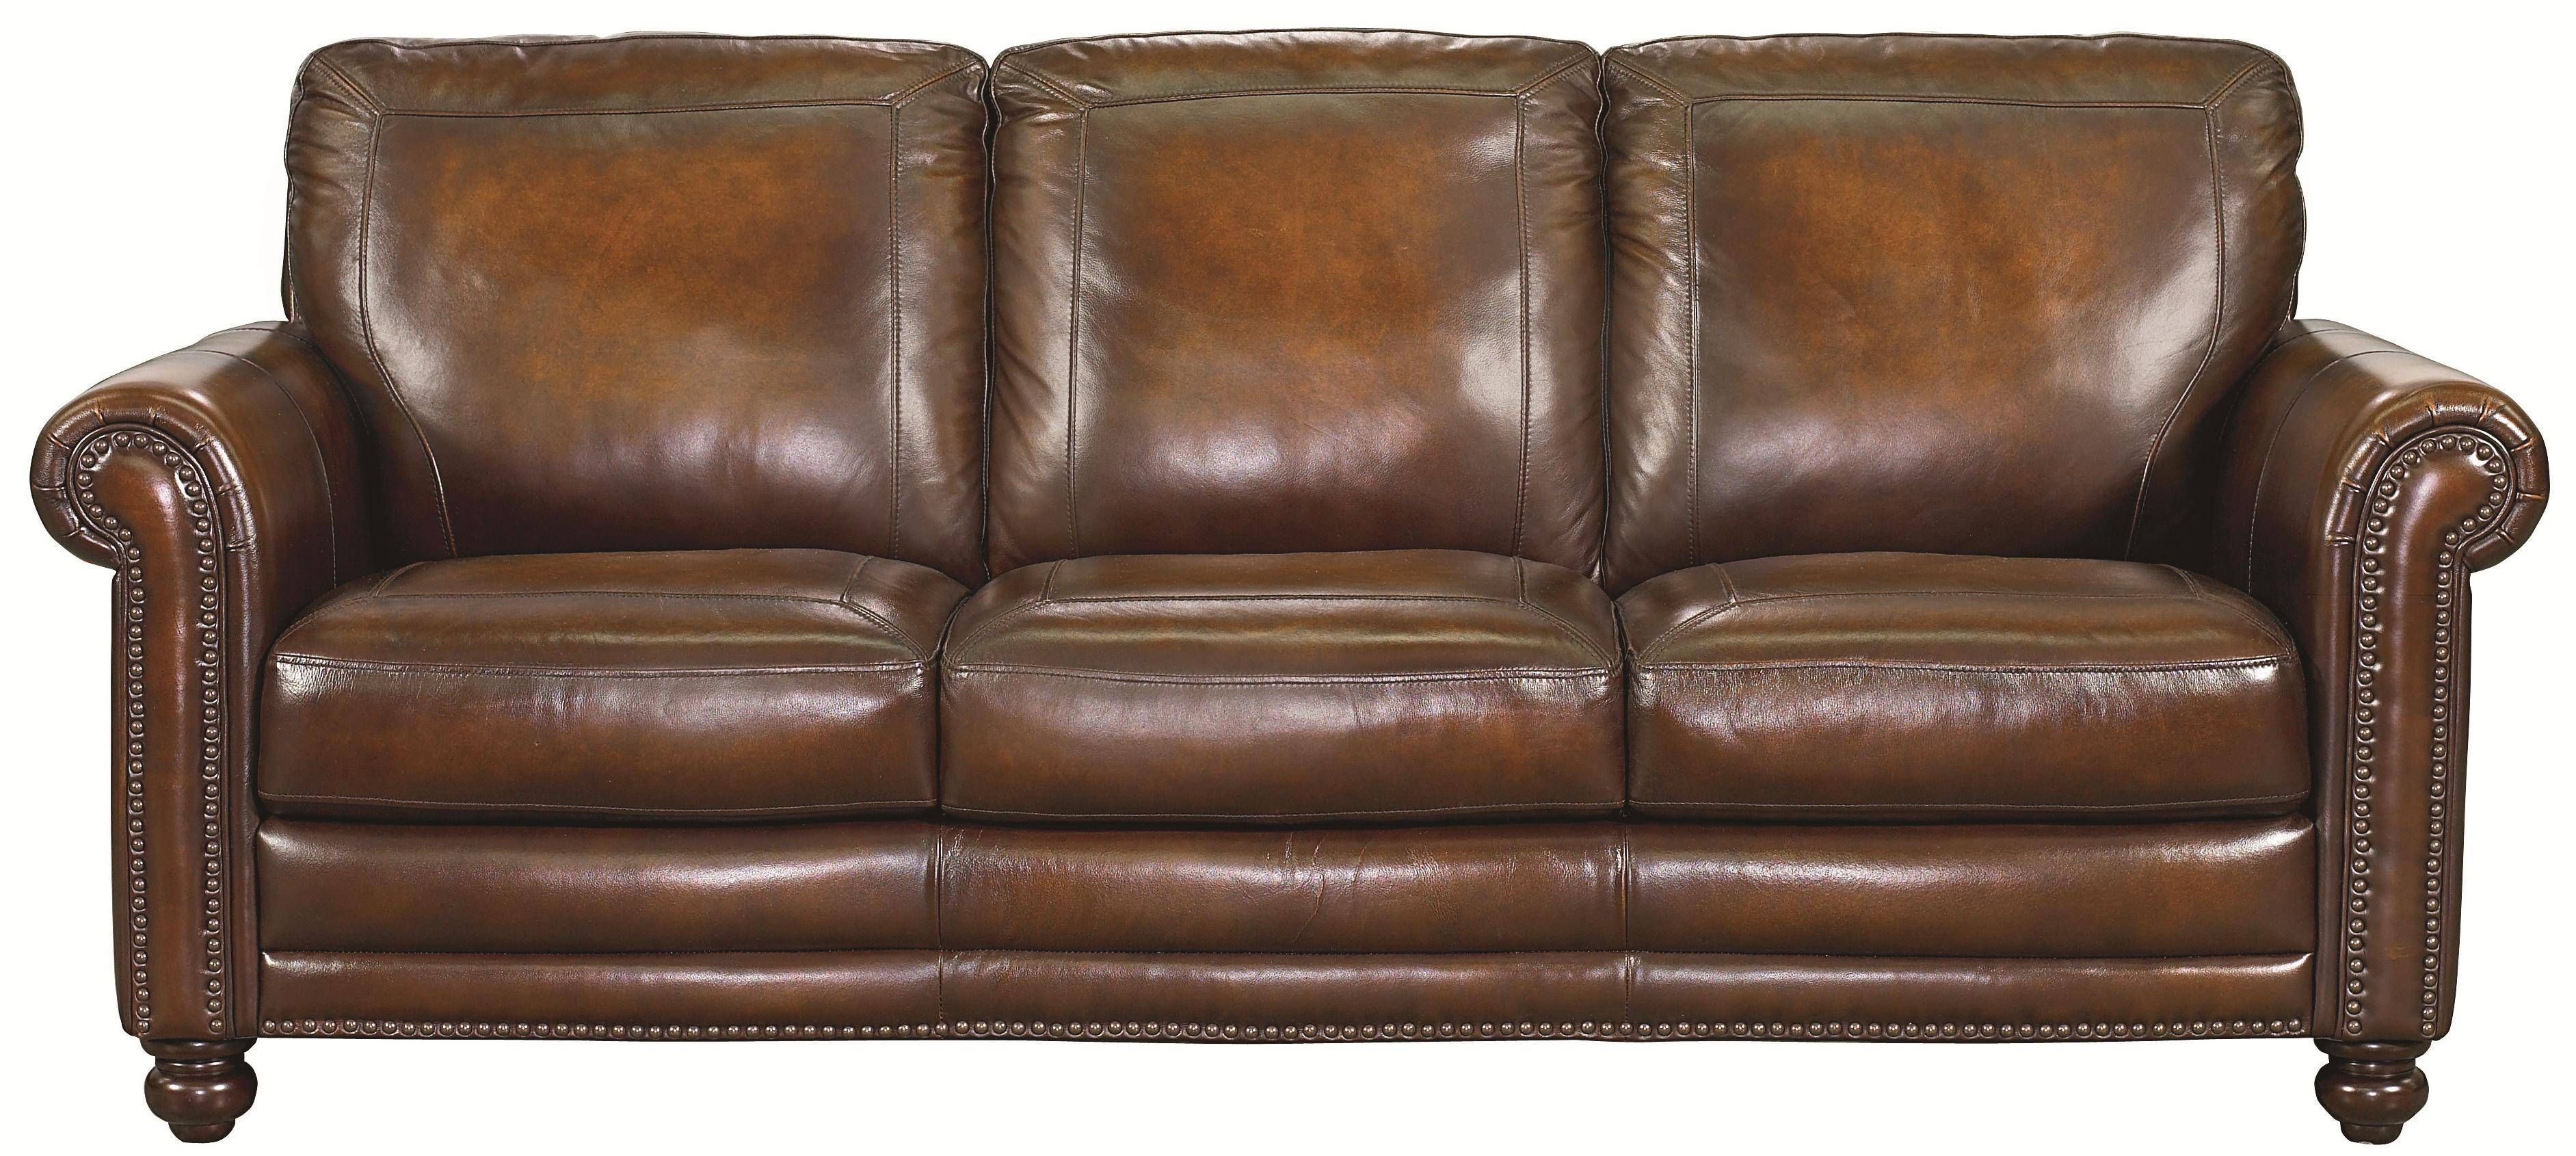 Bassett Hamilton Traditional Sofa With Nail Head Trim – Great Inside Brown Leather Sofas With Nailhead Trim (Photo 7 of 15)